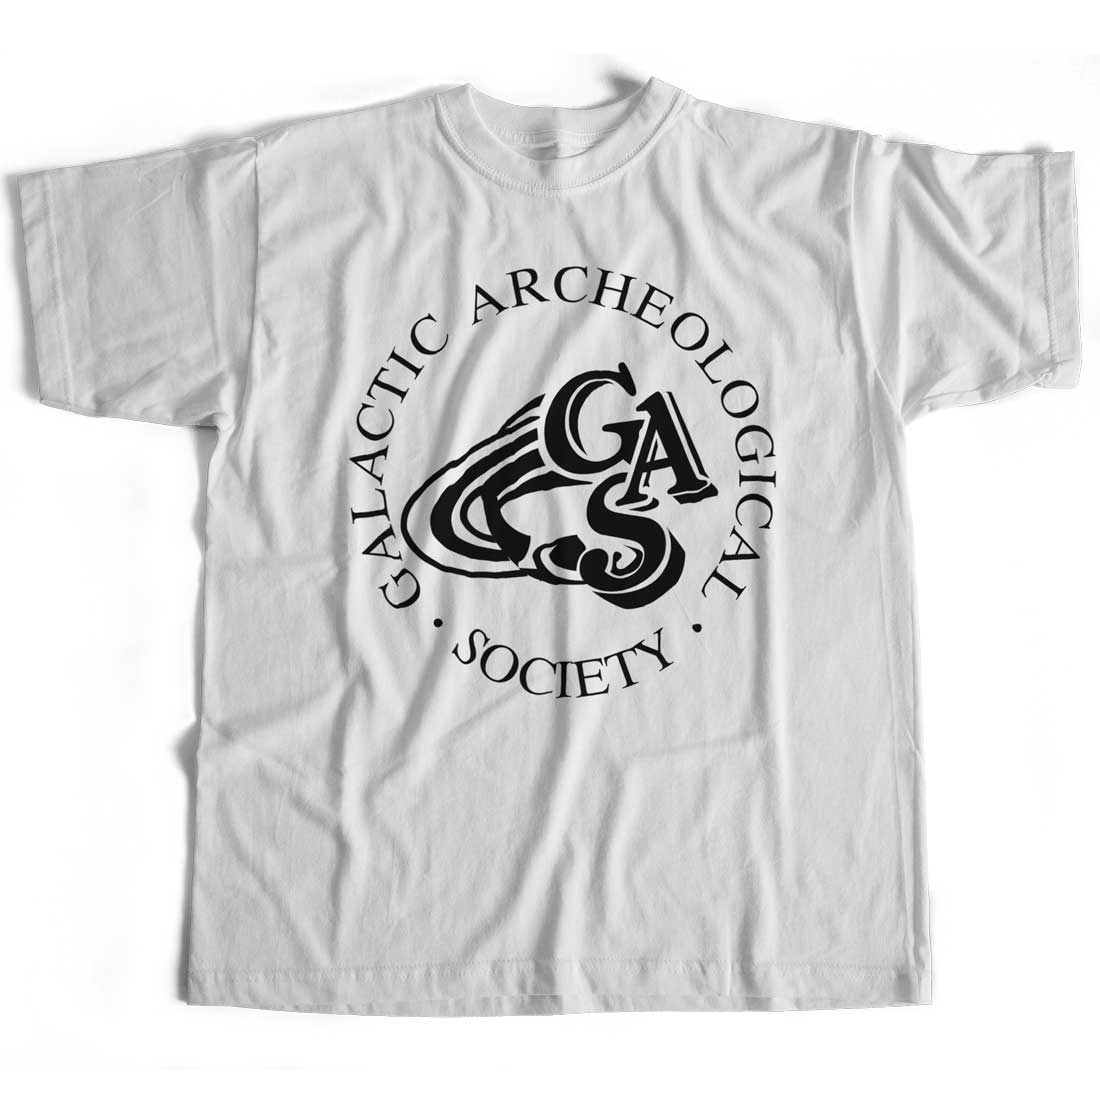 As Worn On The Adventure Game T shirt - Galactic Archeological Society Cult 80's TV